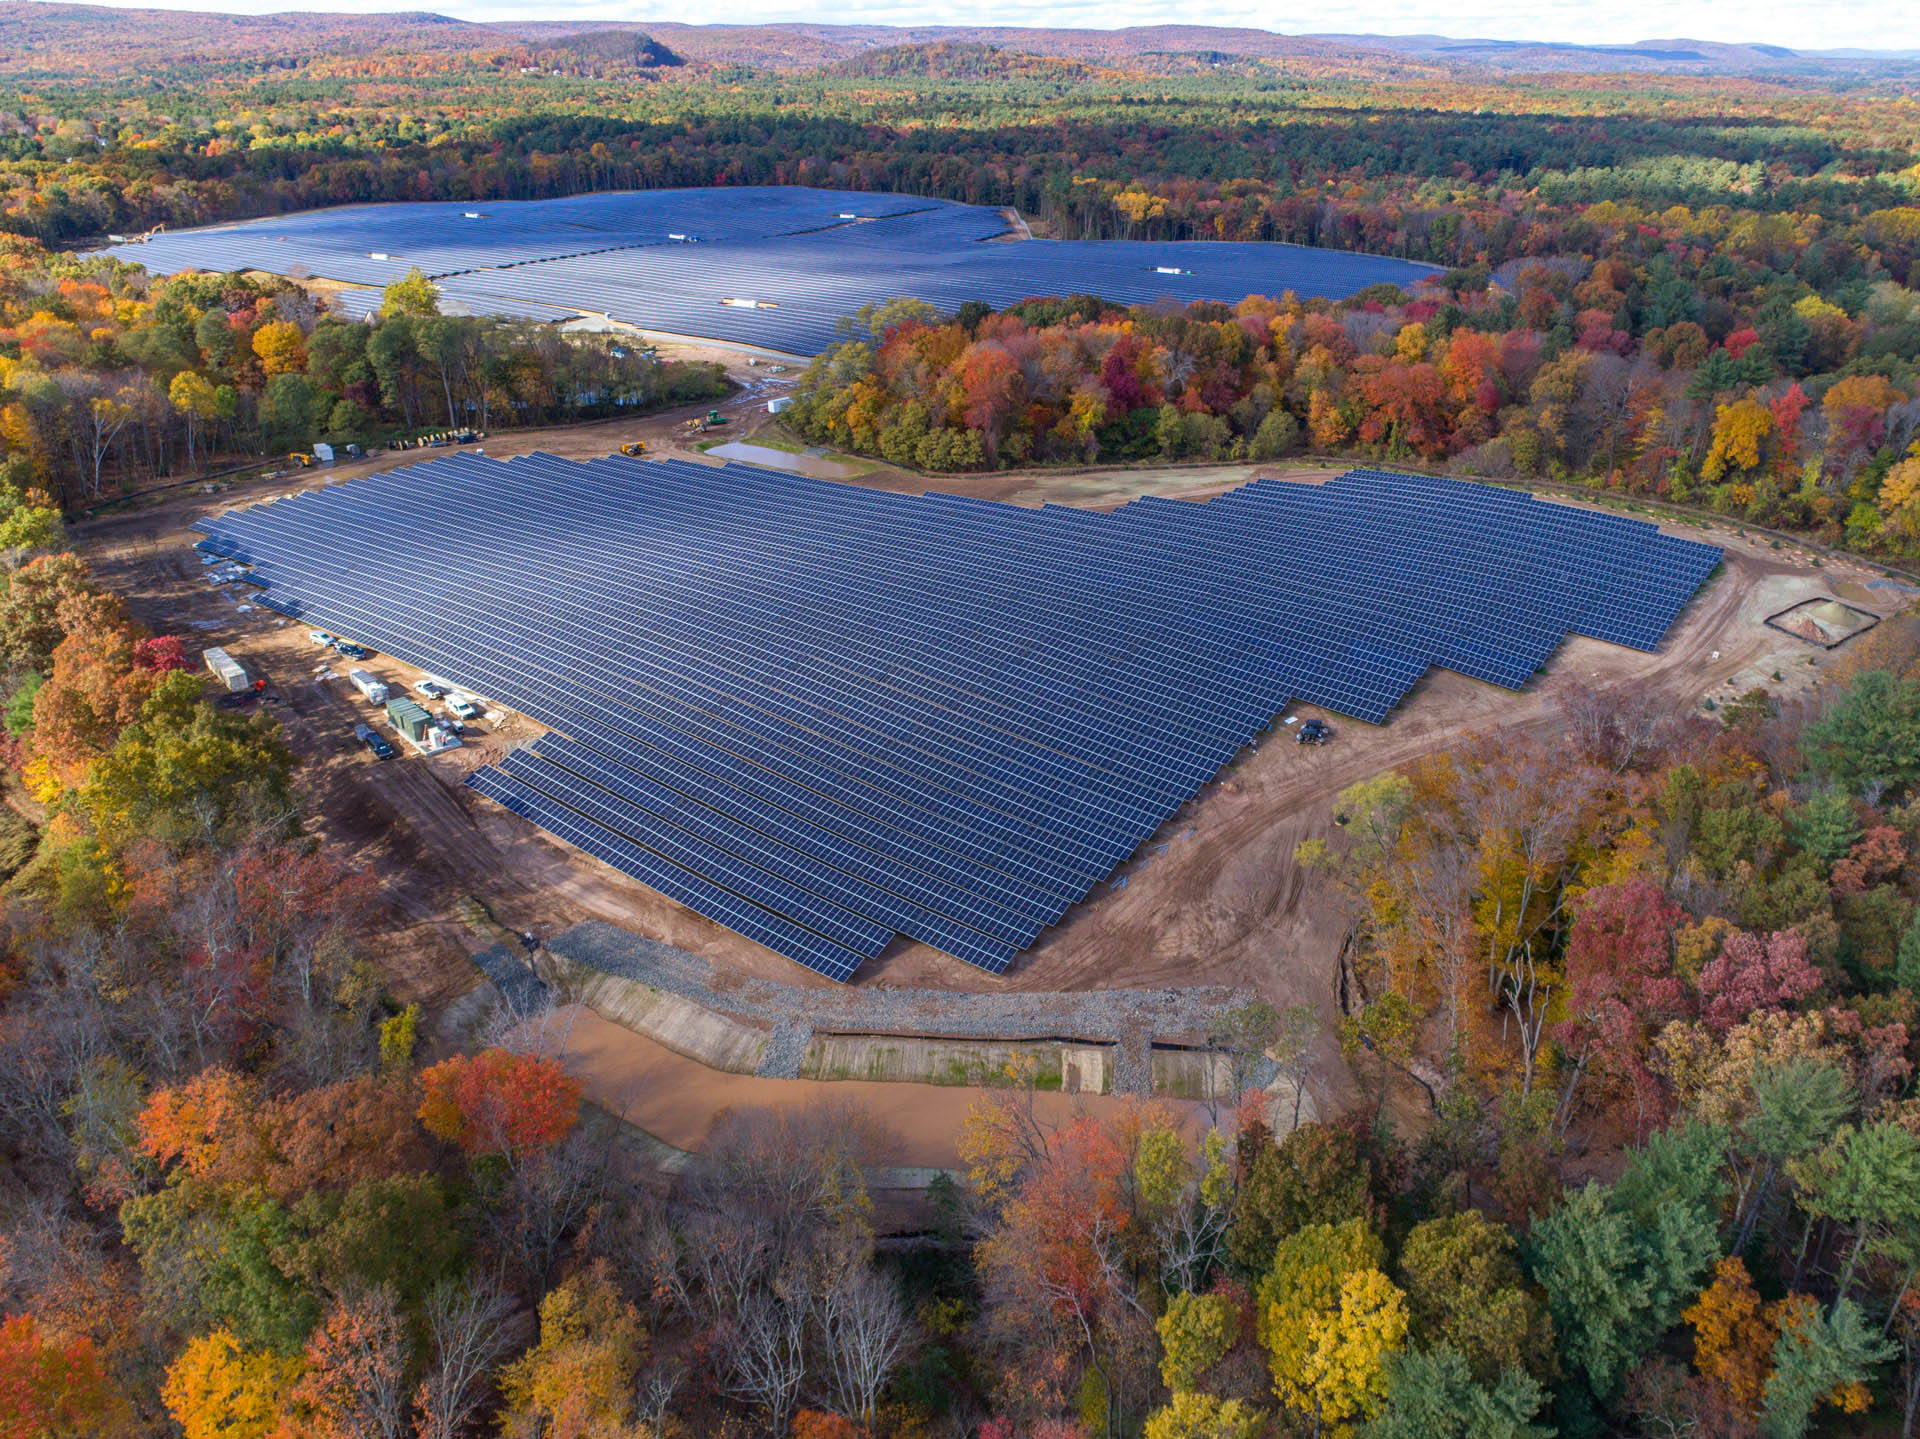 Aerial drone view of Tobacco Valley solar farm surrounded by fall foliage in Connecticut.